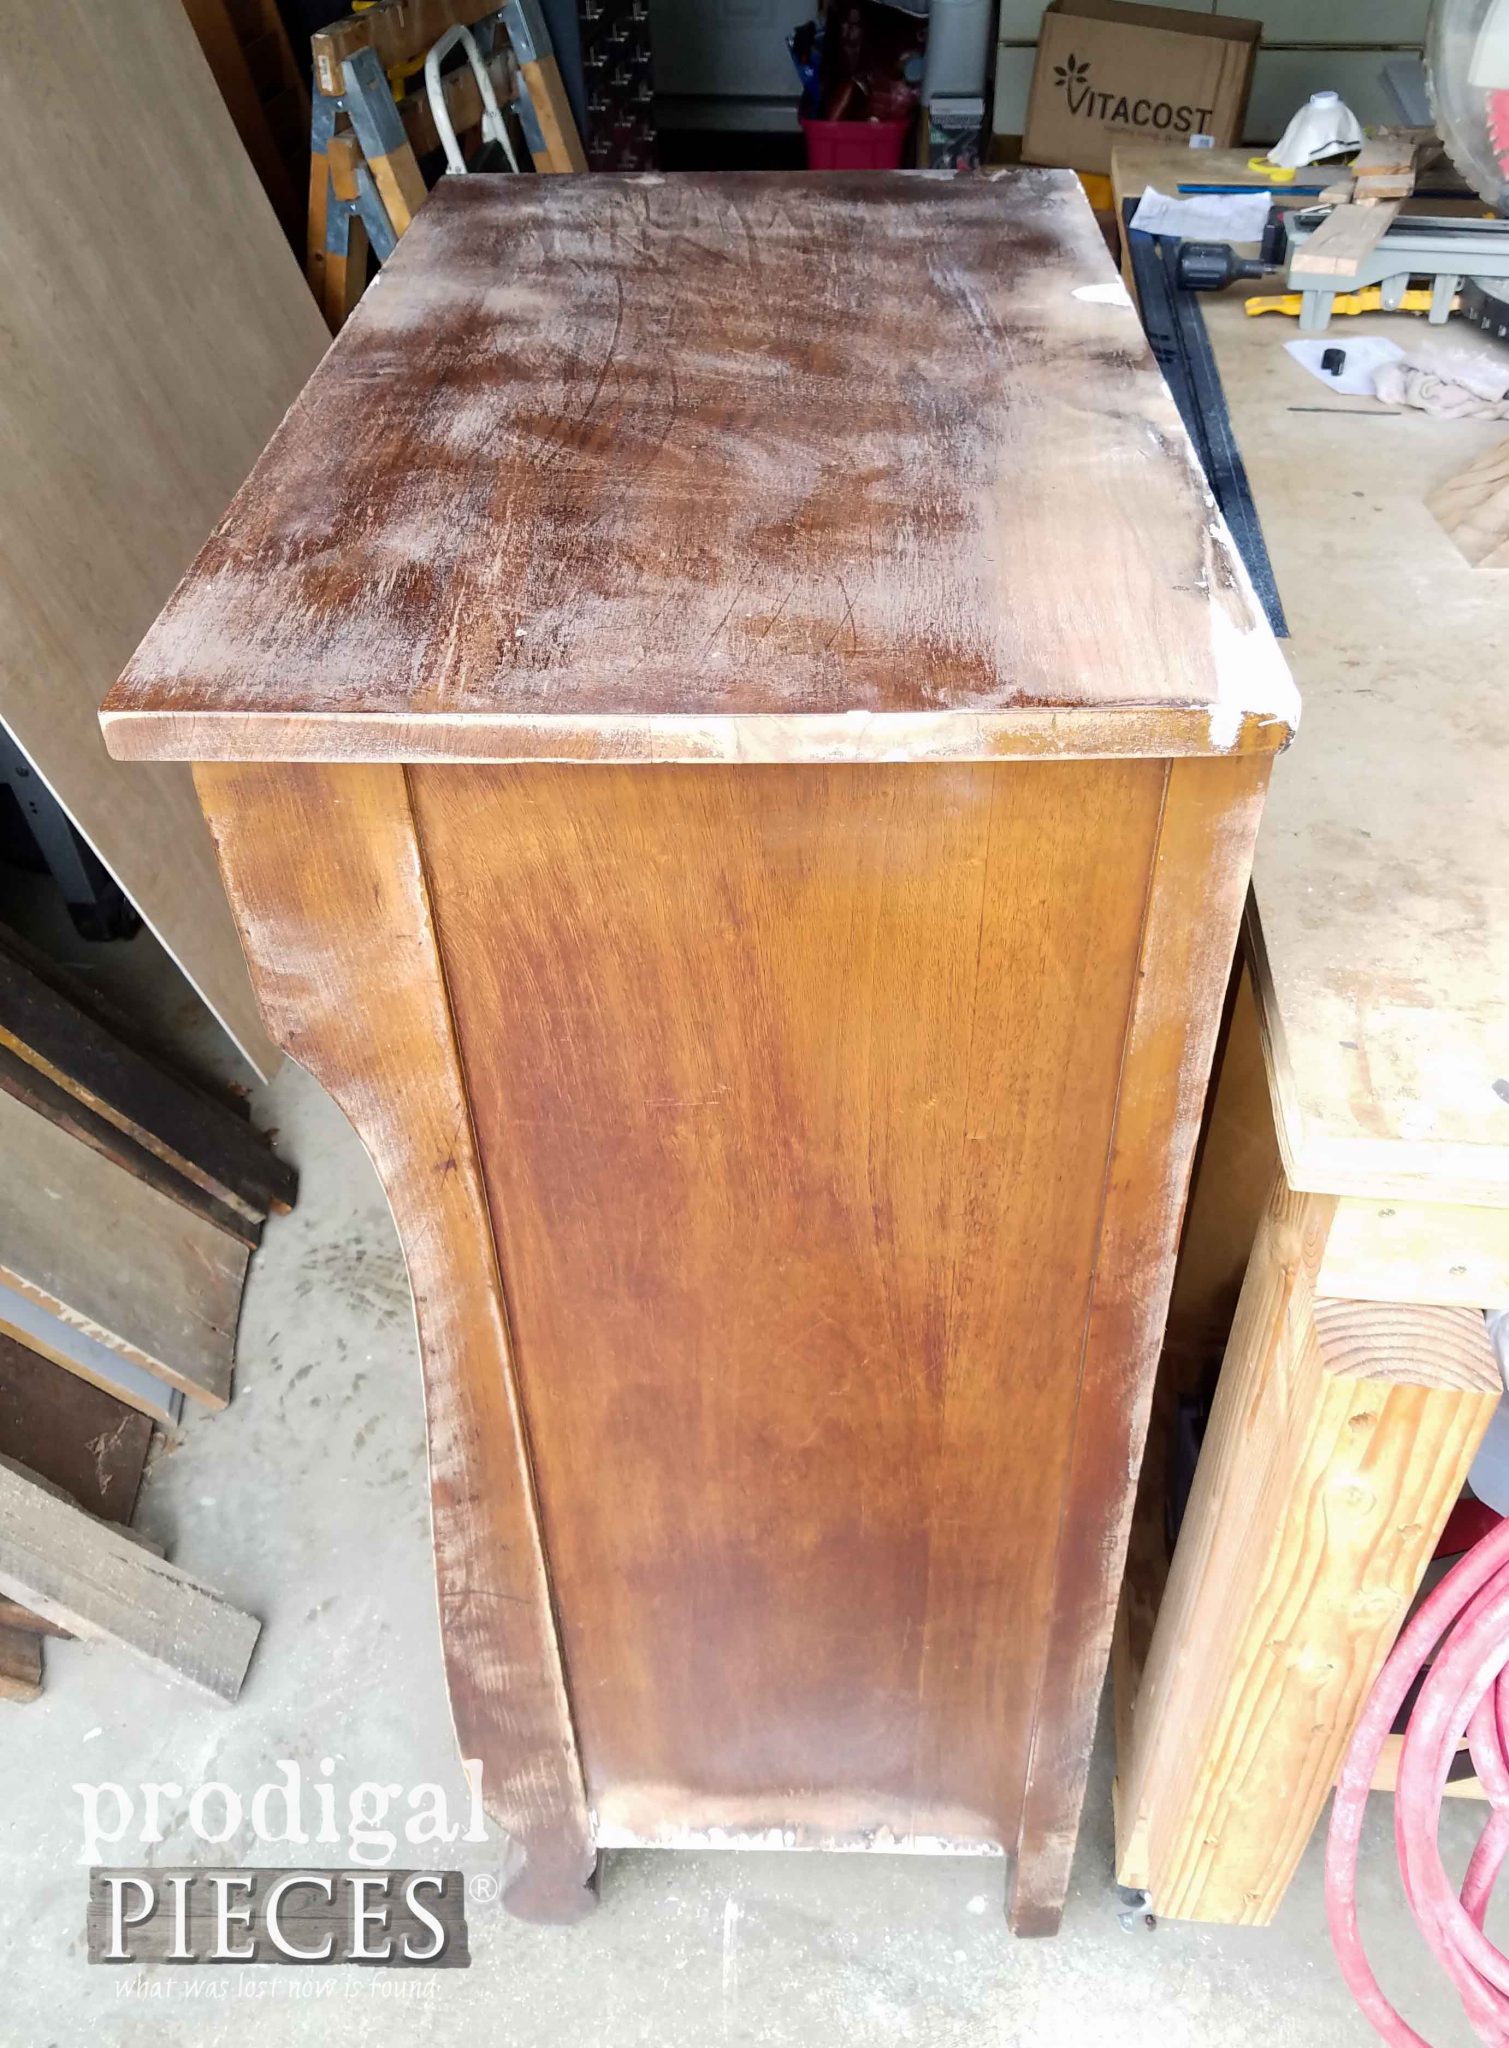 Repairs Made to Antique Chest of Drawers by Prodigal Pieces | prodigalpieces.com